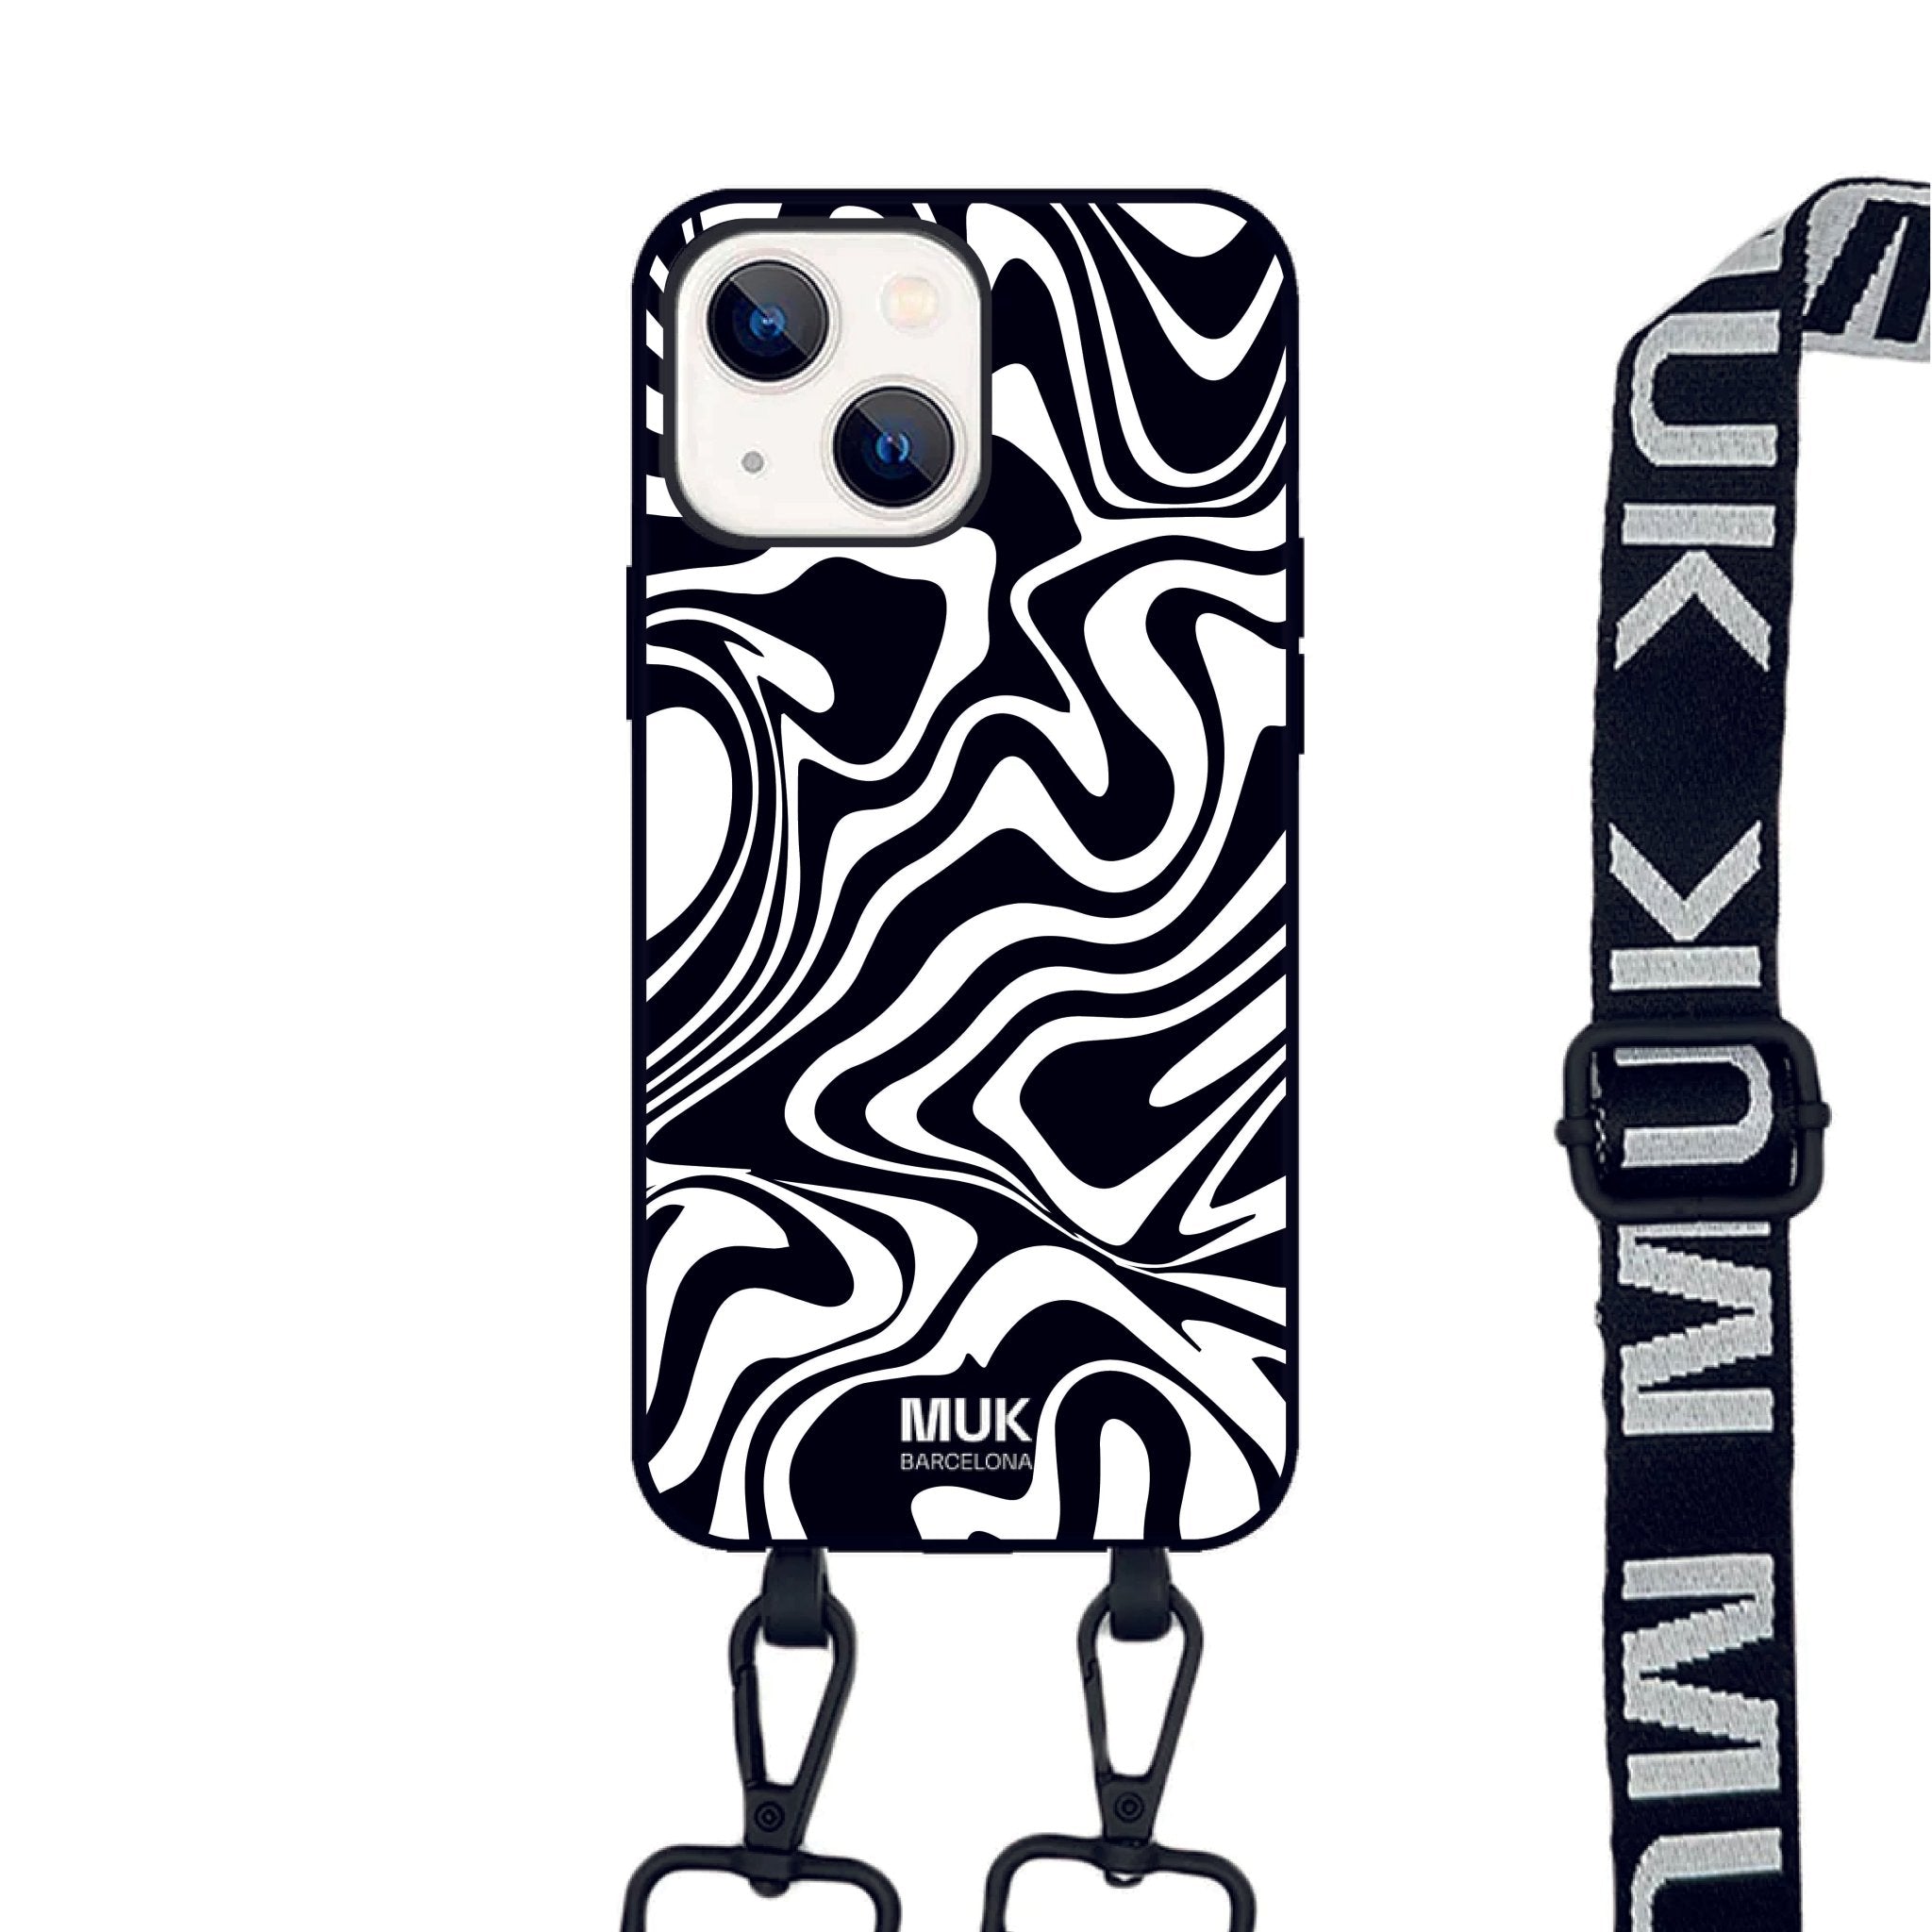 Black Phone case with a design on it
